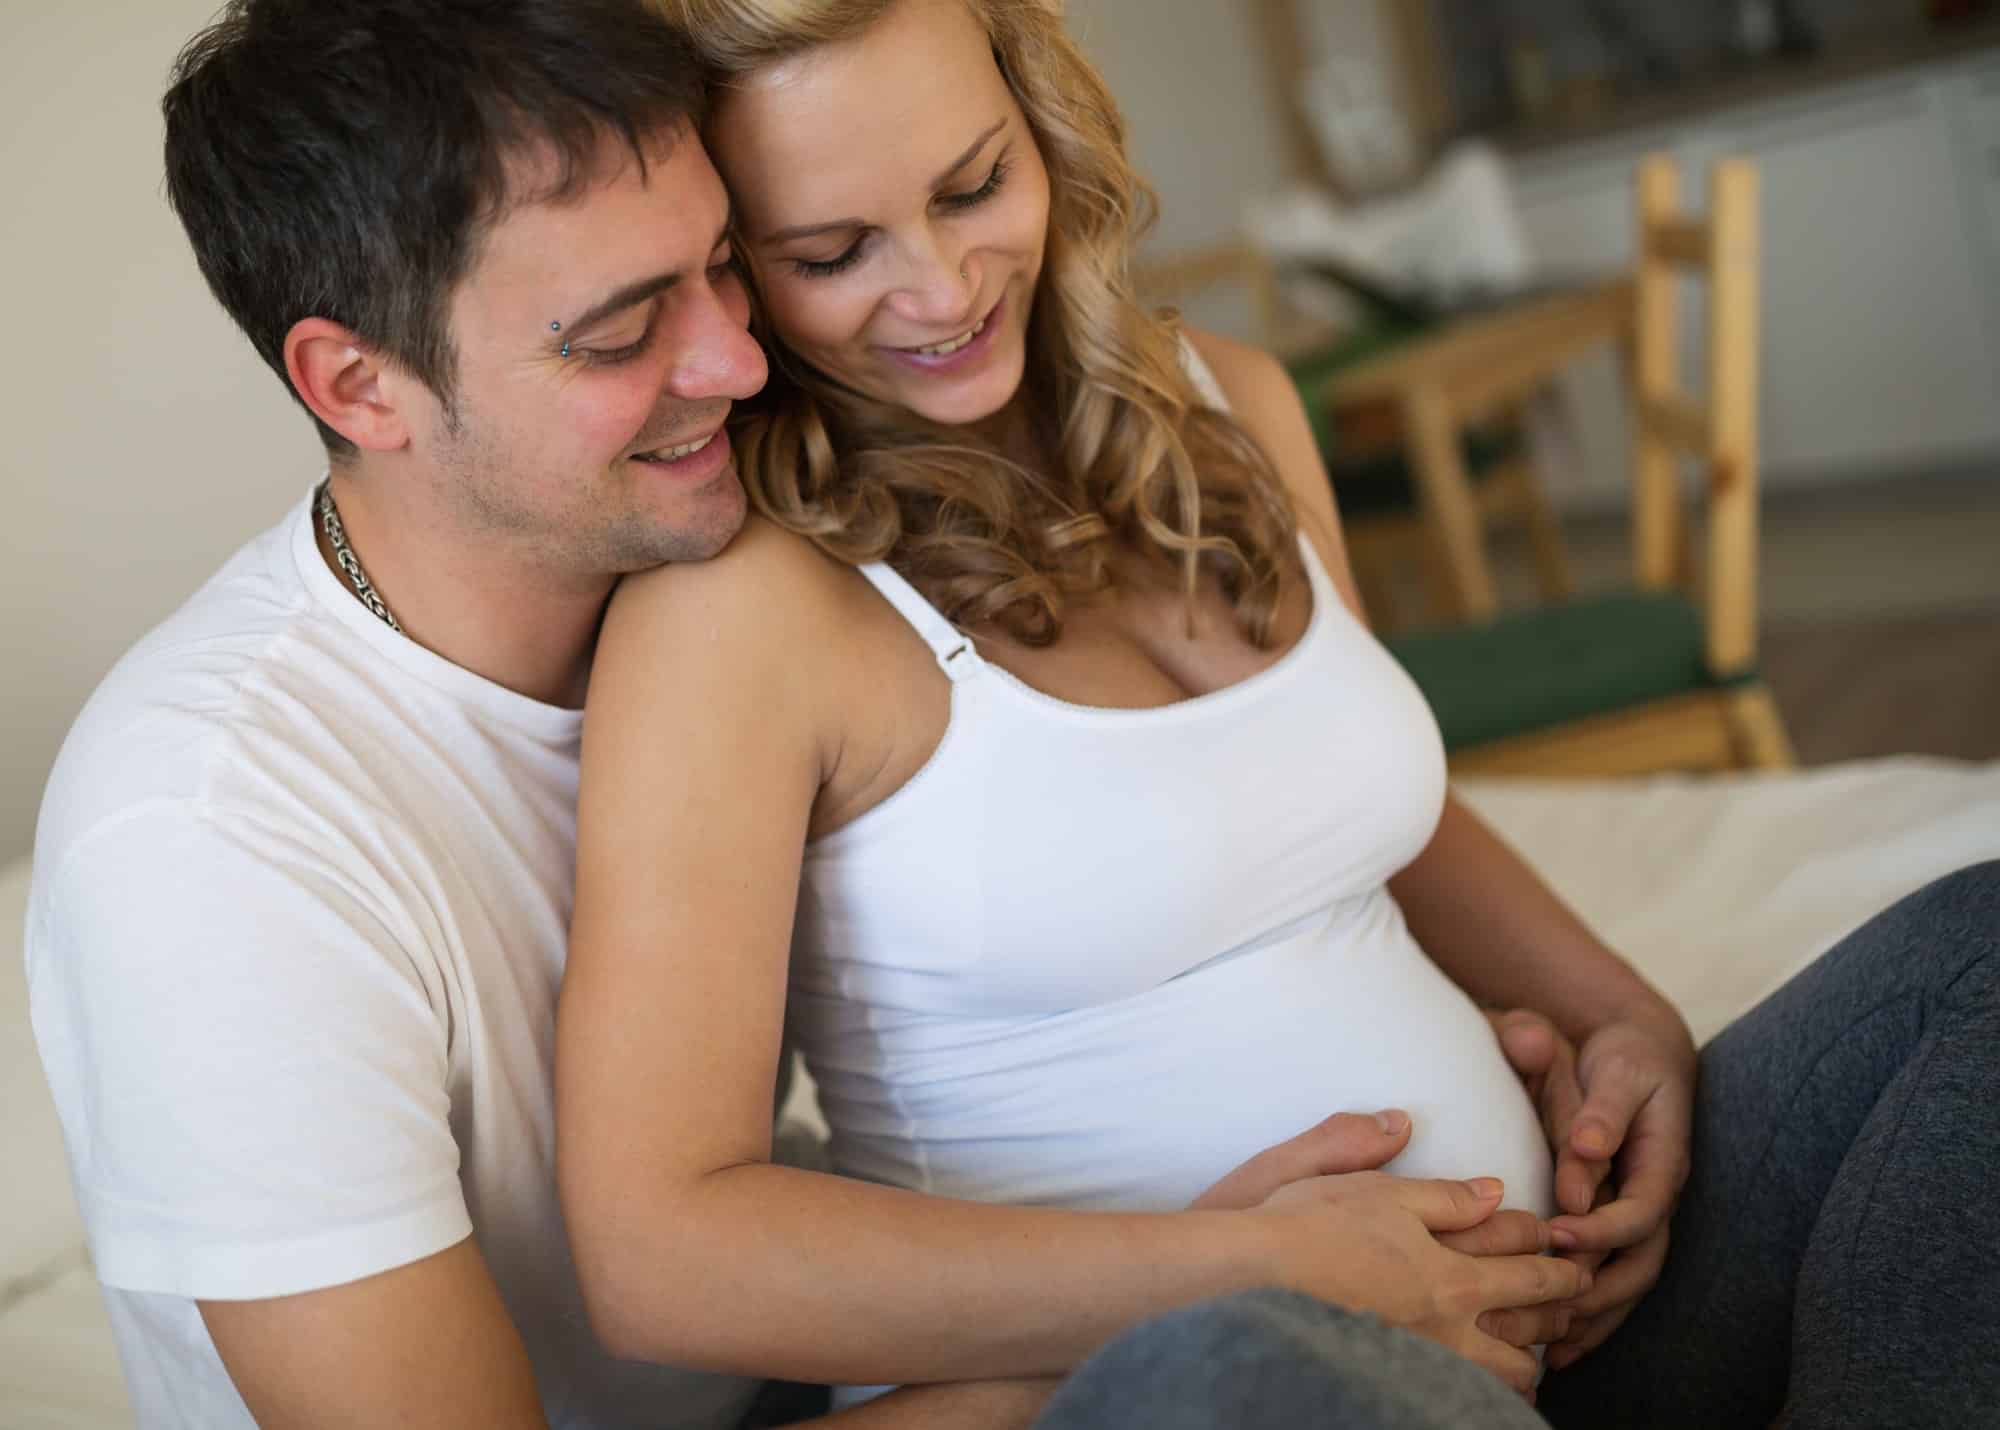 Going Past Due Date: Some Truths for Pregnant Women